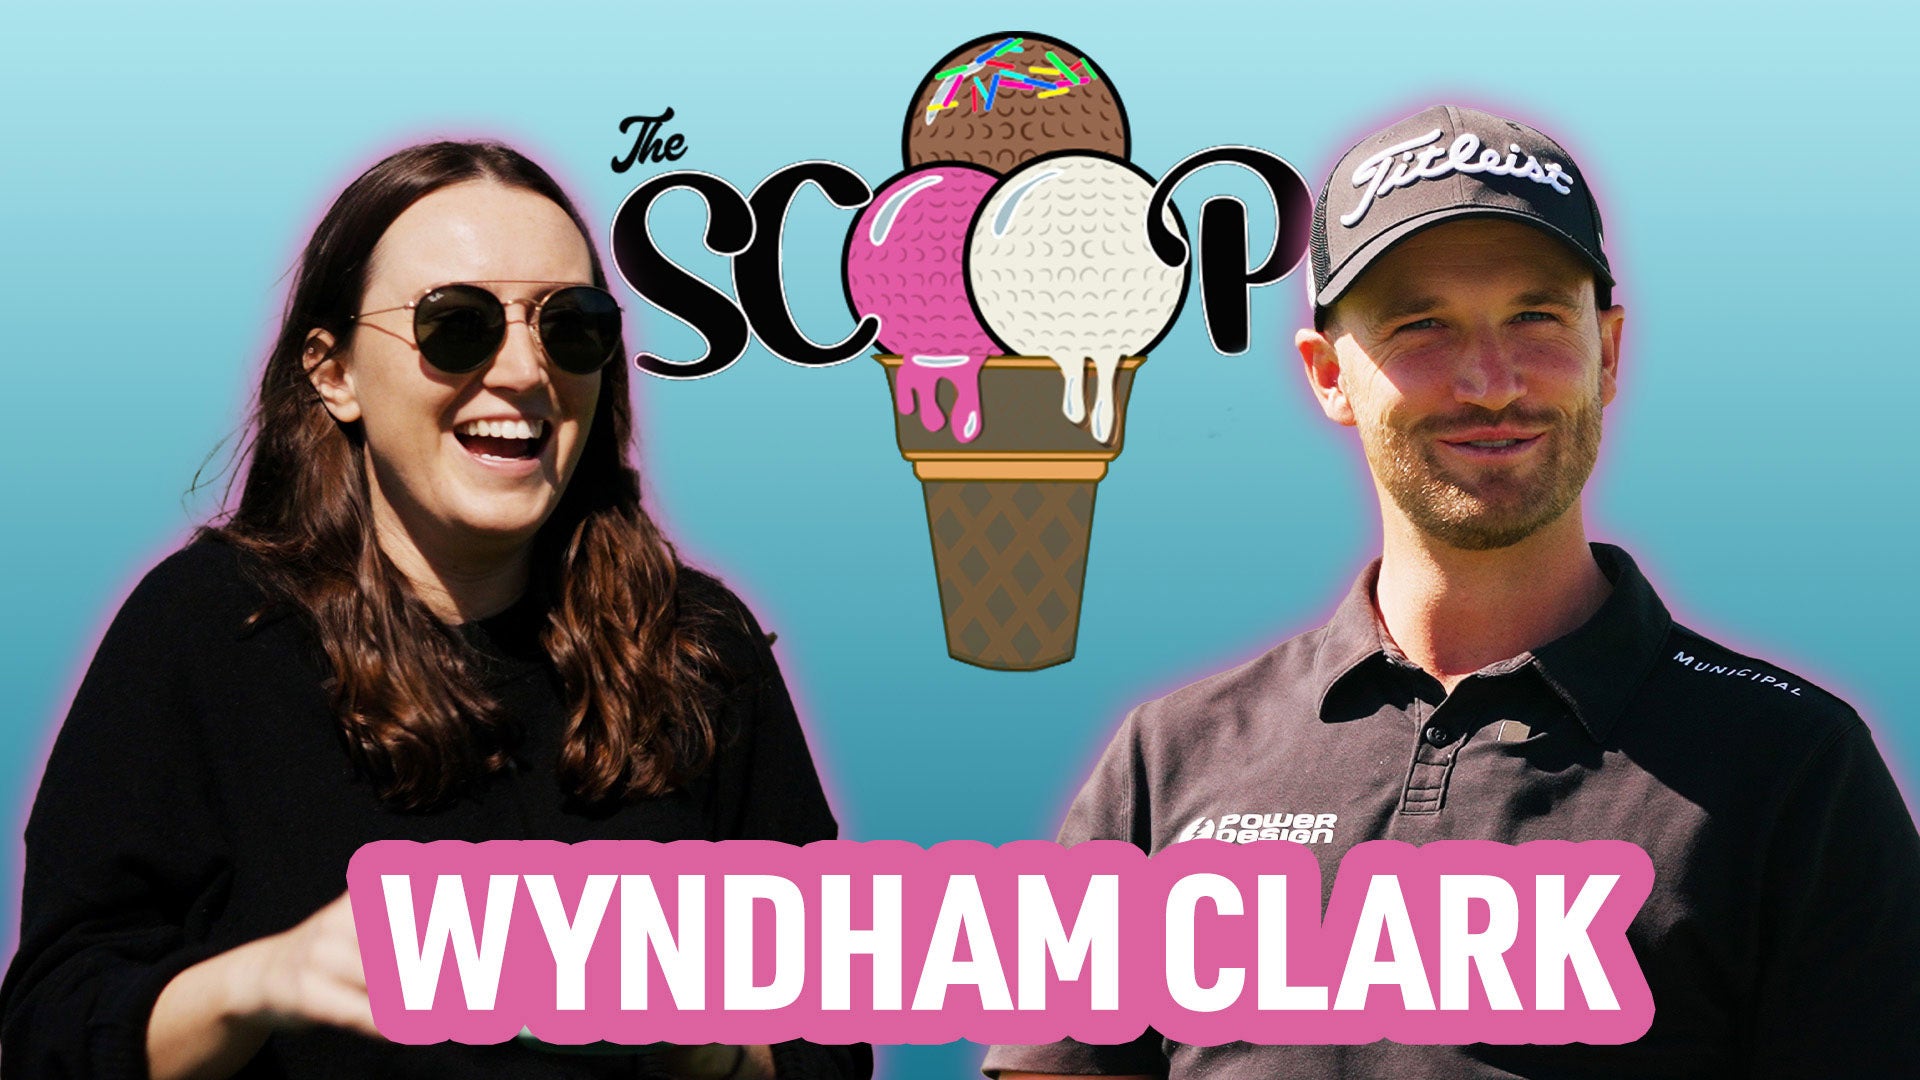 Wyndham Clark joined this episode of the Scoop.